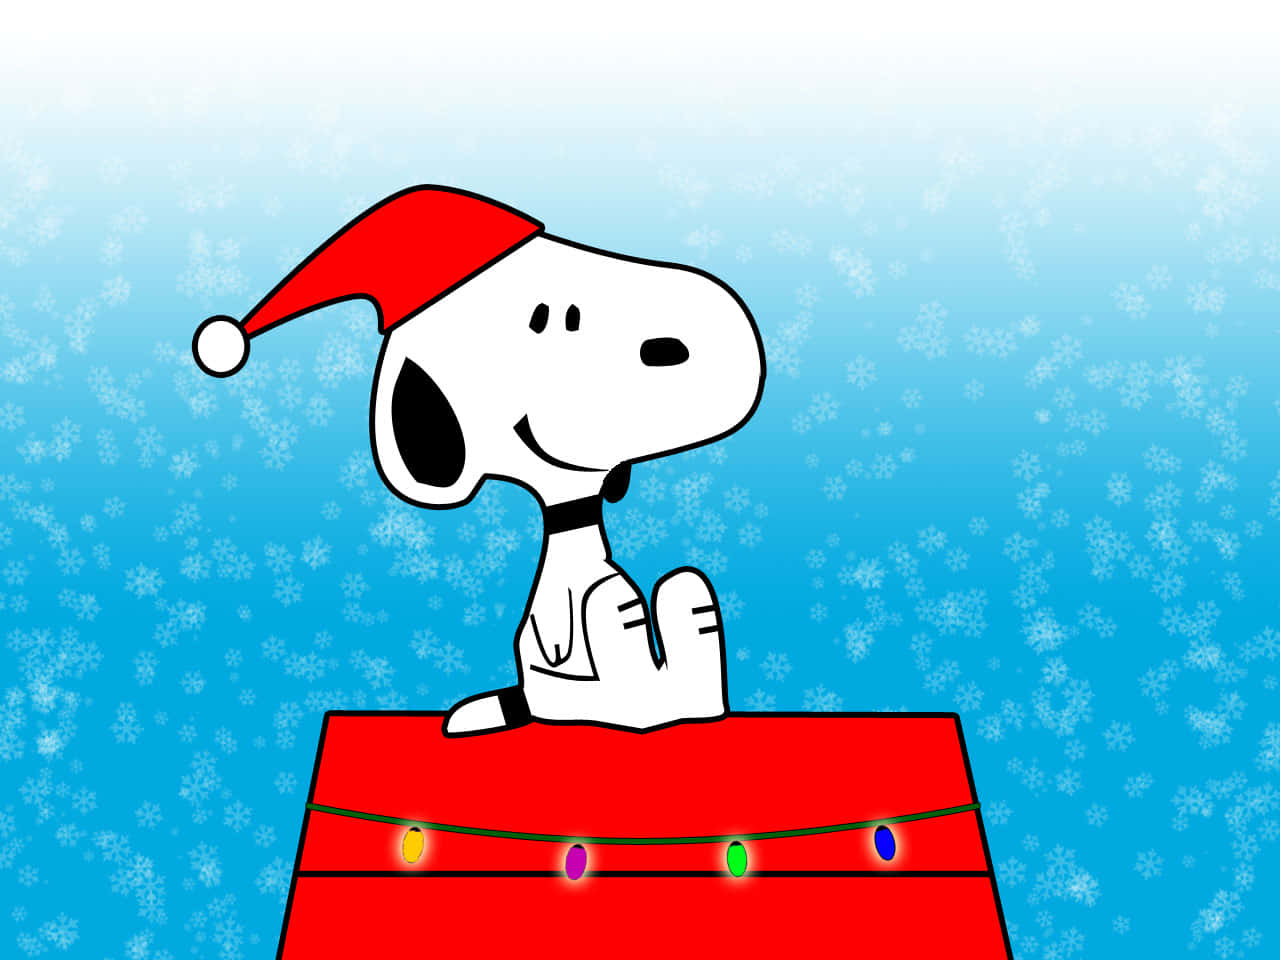 Charlie Brown Celebrates The Joy And Wonder Of Christmas Wallpaper